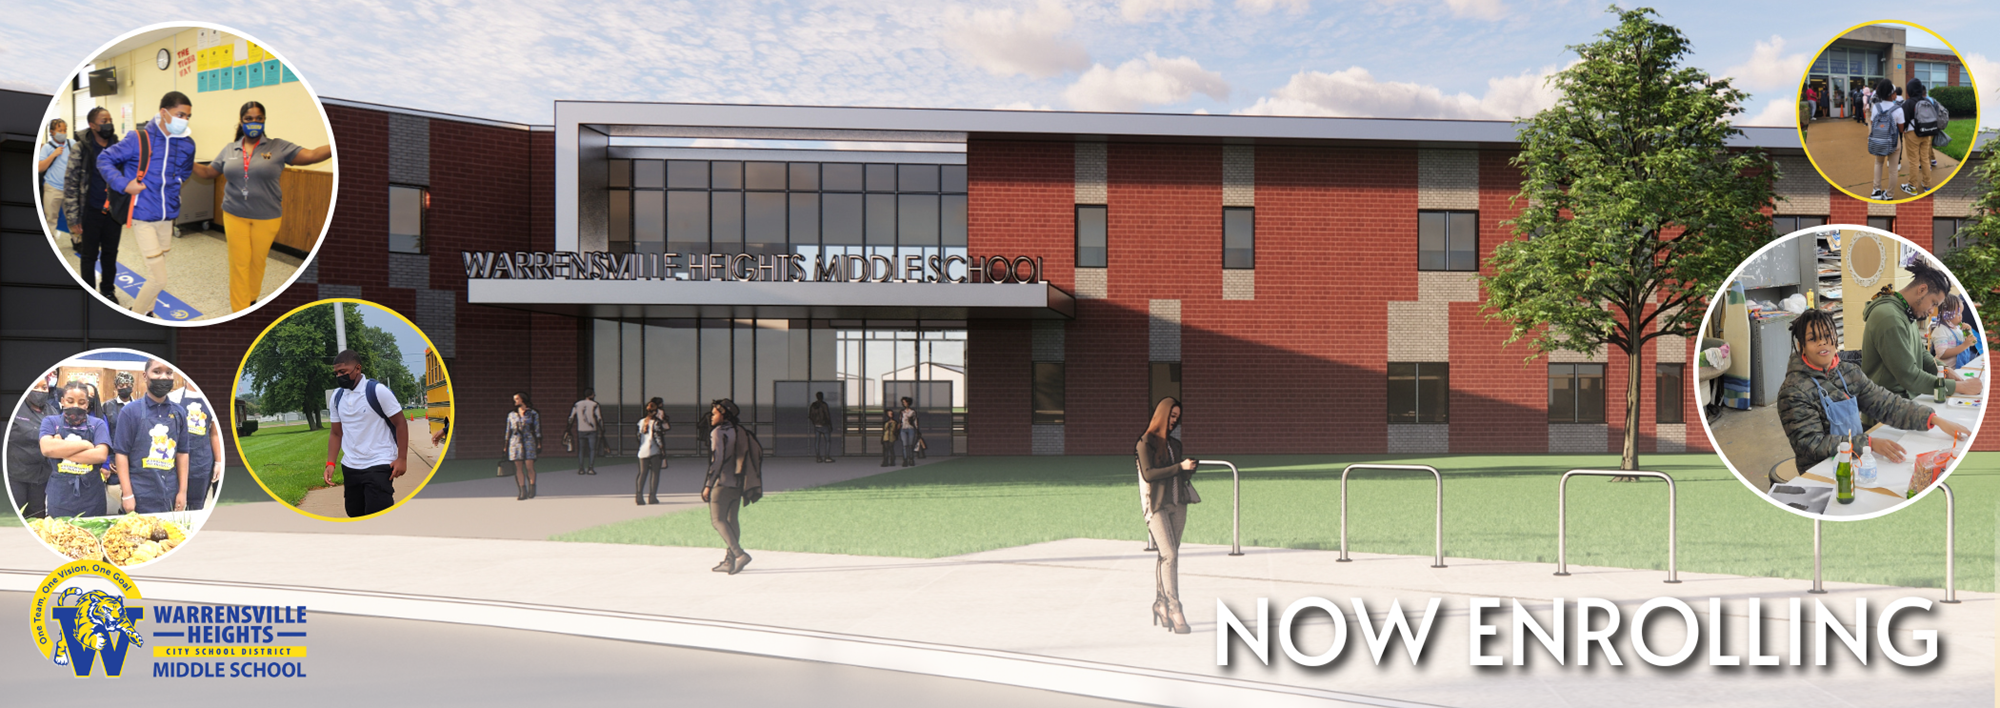 New middle school architect rendering with pictures of students overlapped on it 